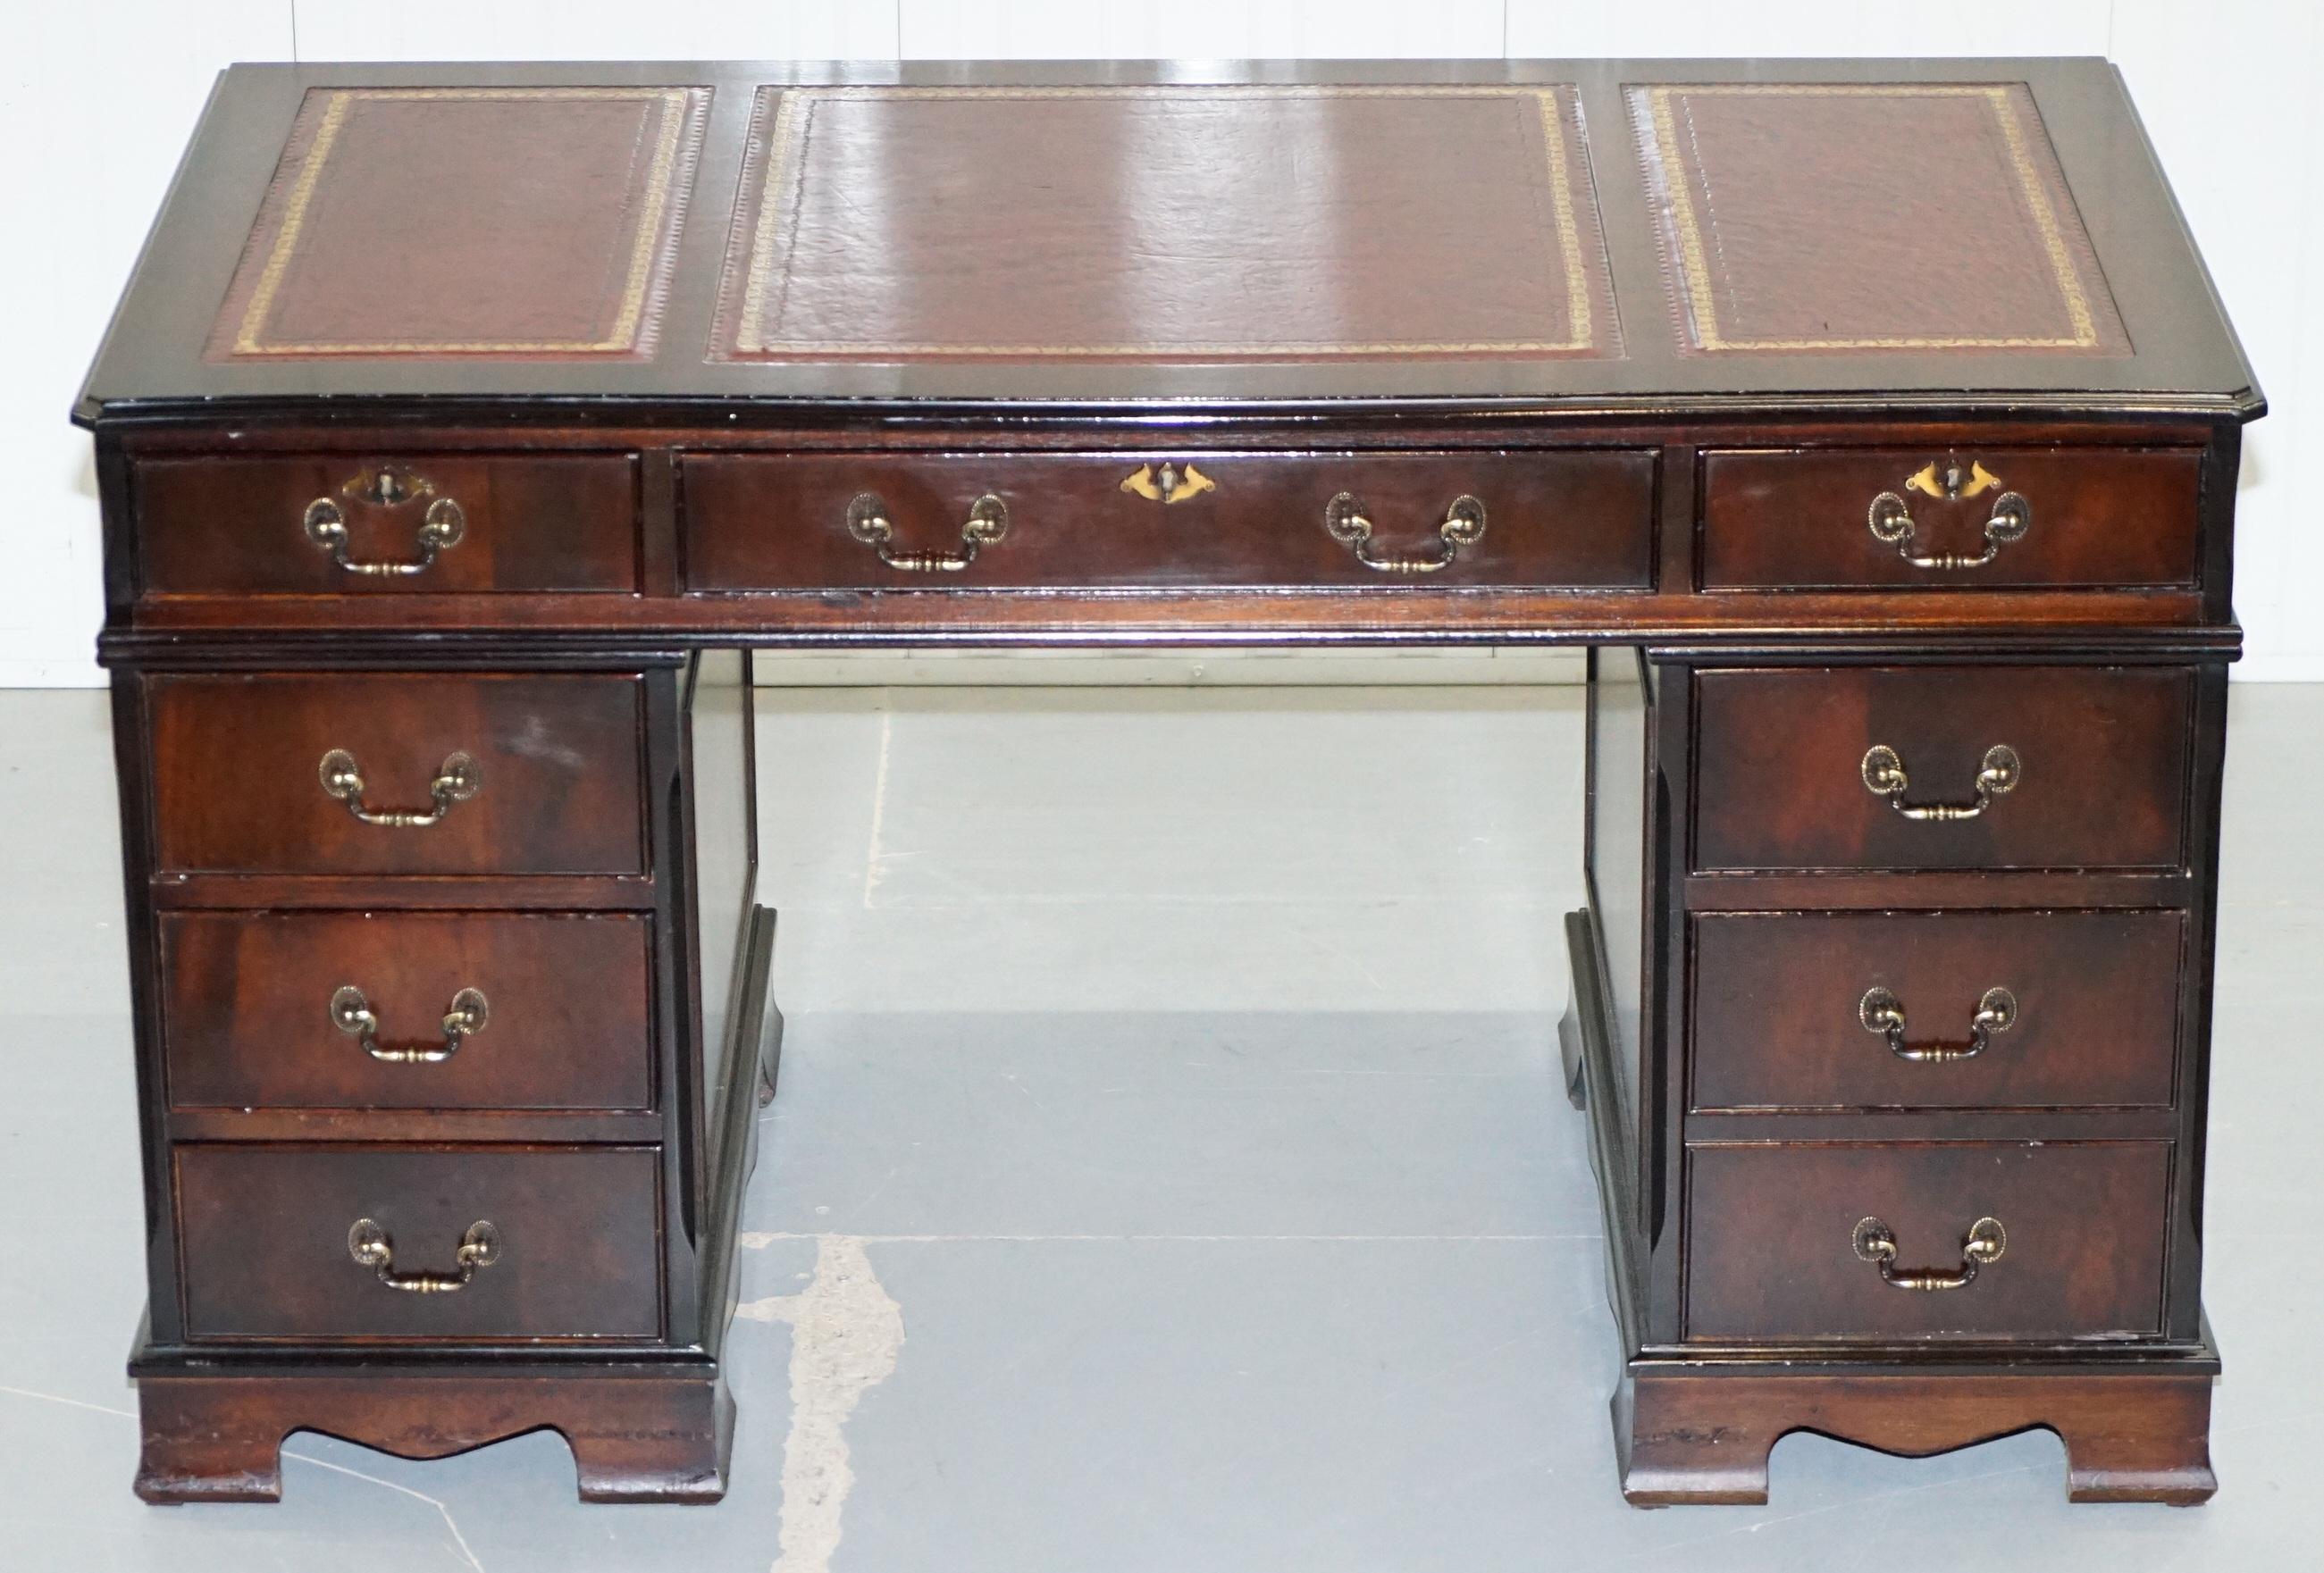 We are delighted to offer for sale this Premium twin pedestal partner desk finished in luxury mahogany with an oxblood leather top 

A very good looking and well-made desk with a lovely timber patina, the leather top is original and nicely worn